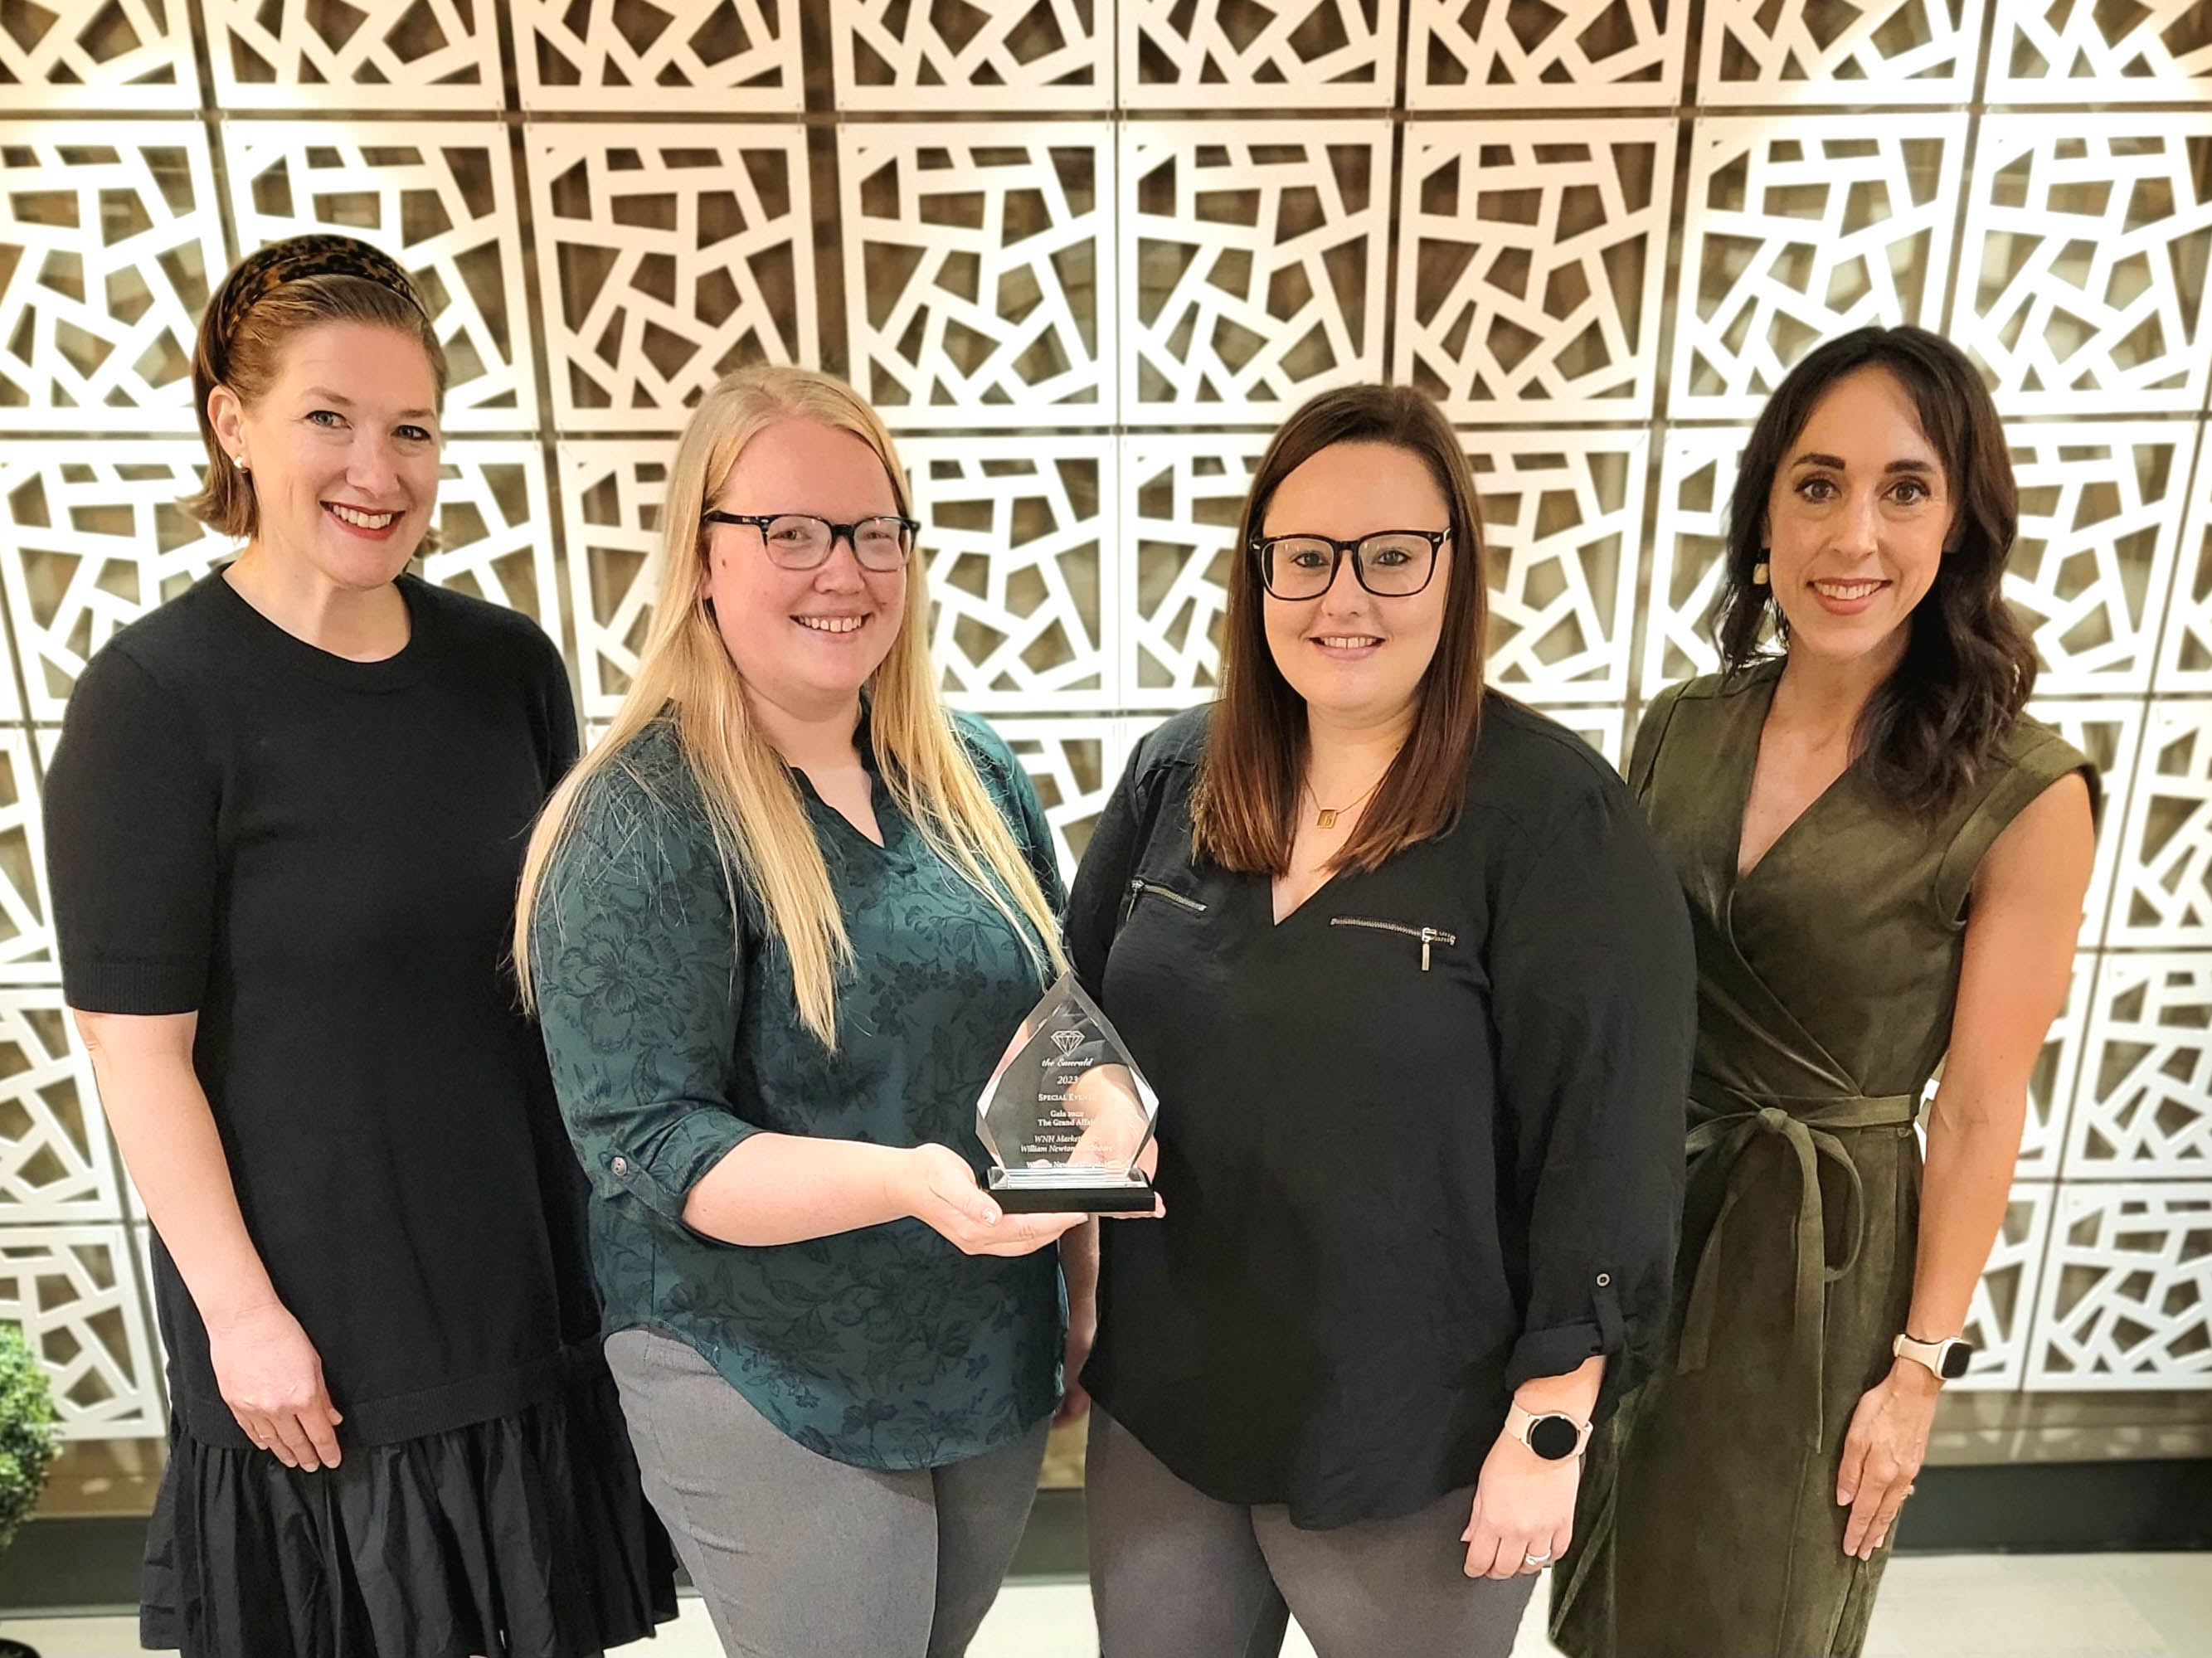 The 2022 William Newton Healthcare Foundation’s annual gala receives an award in the special events category. From left: Annika Morris, Kylie Stamper, Brittney Shaffer, and Sarah Johnson.